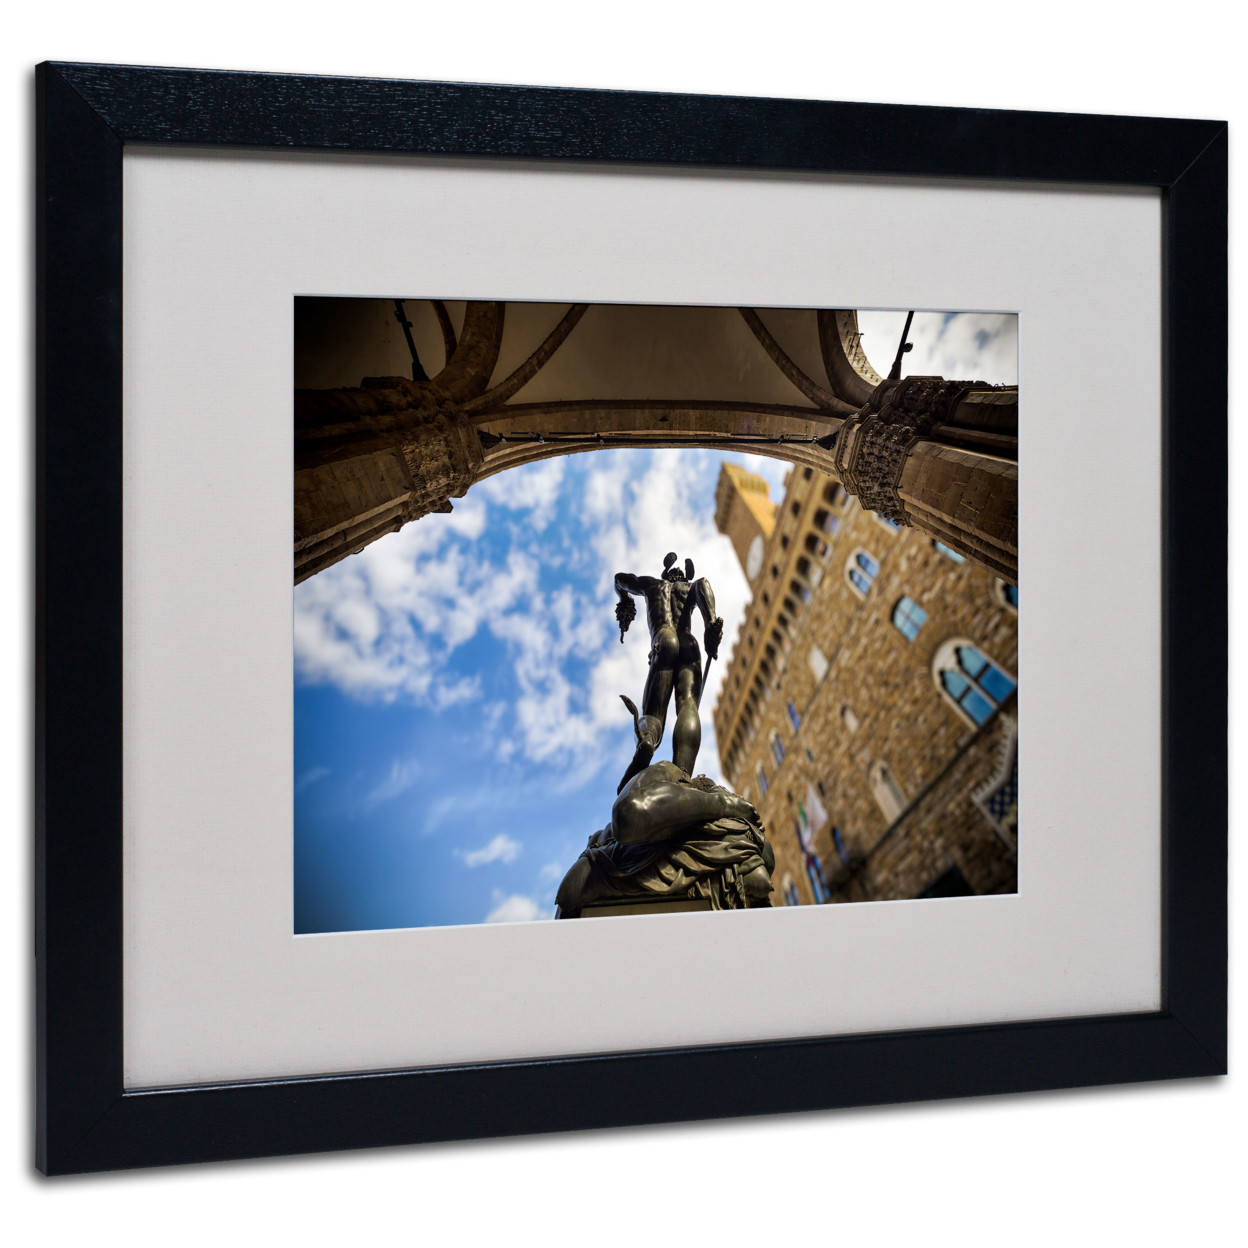 Giuseppe Torre 'Perseus' Black Wooden Framed Art 18 X 22 Inches